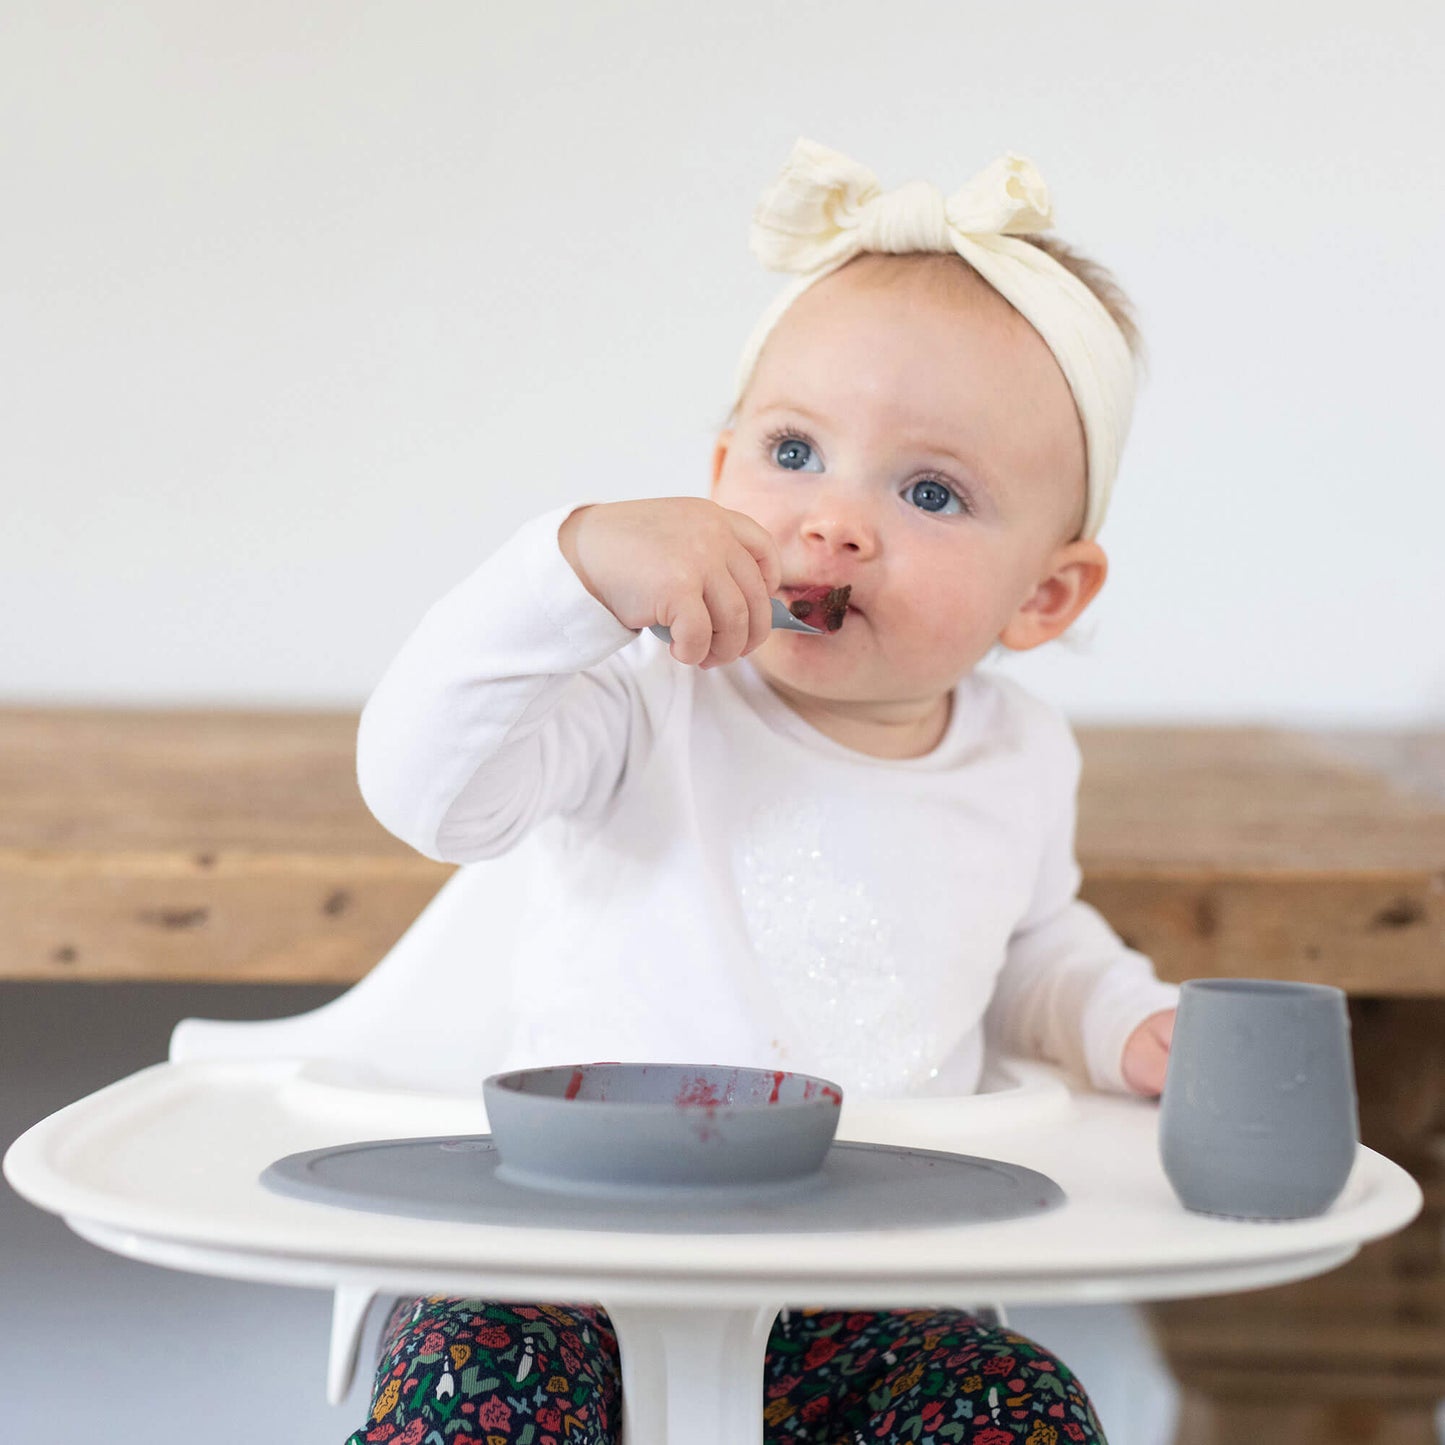 The Tiny Spoon in Gray by ezpz / Small, Sensory Silicone Spoon for Babies